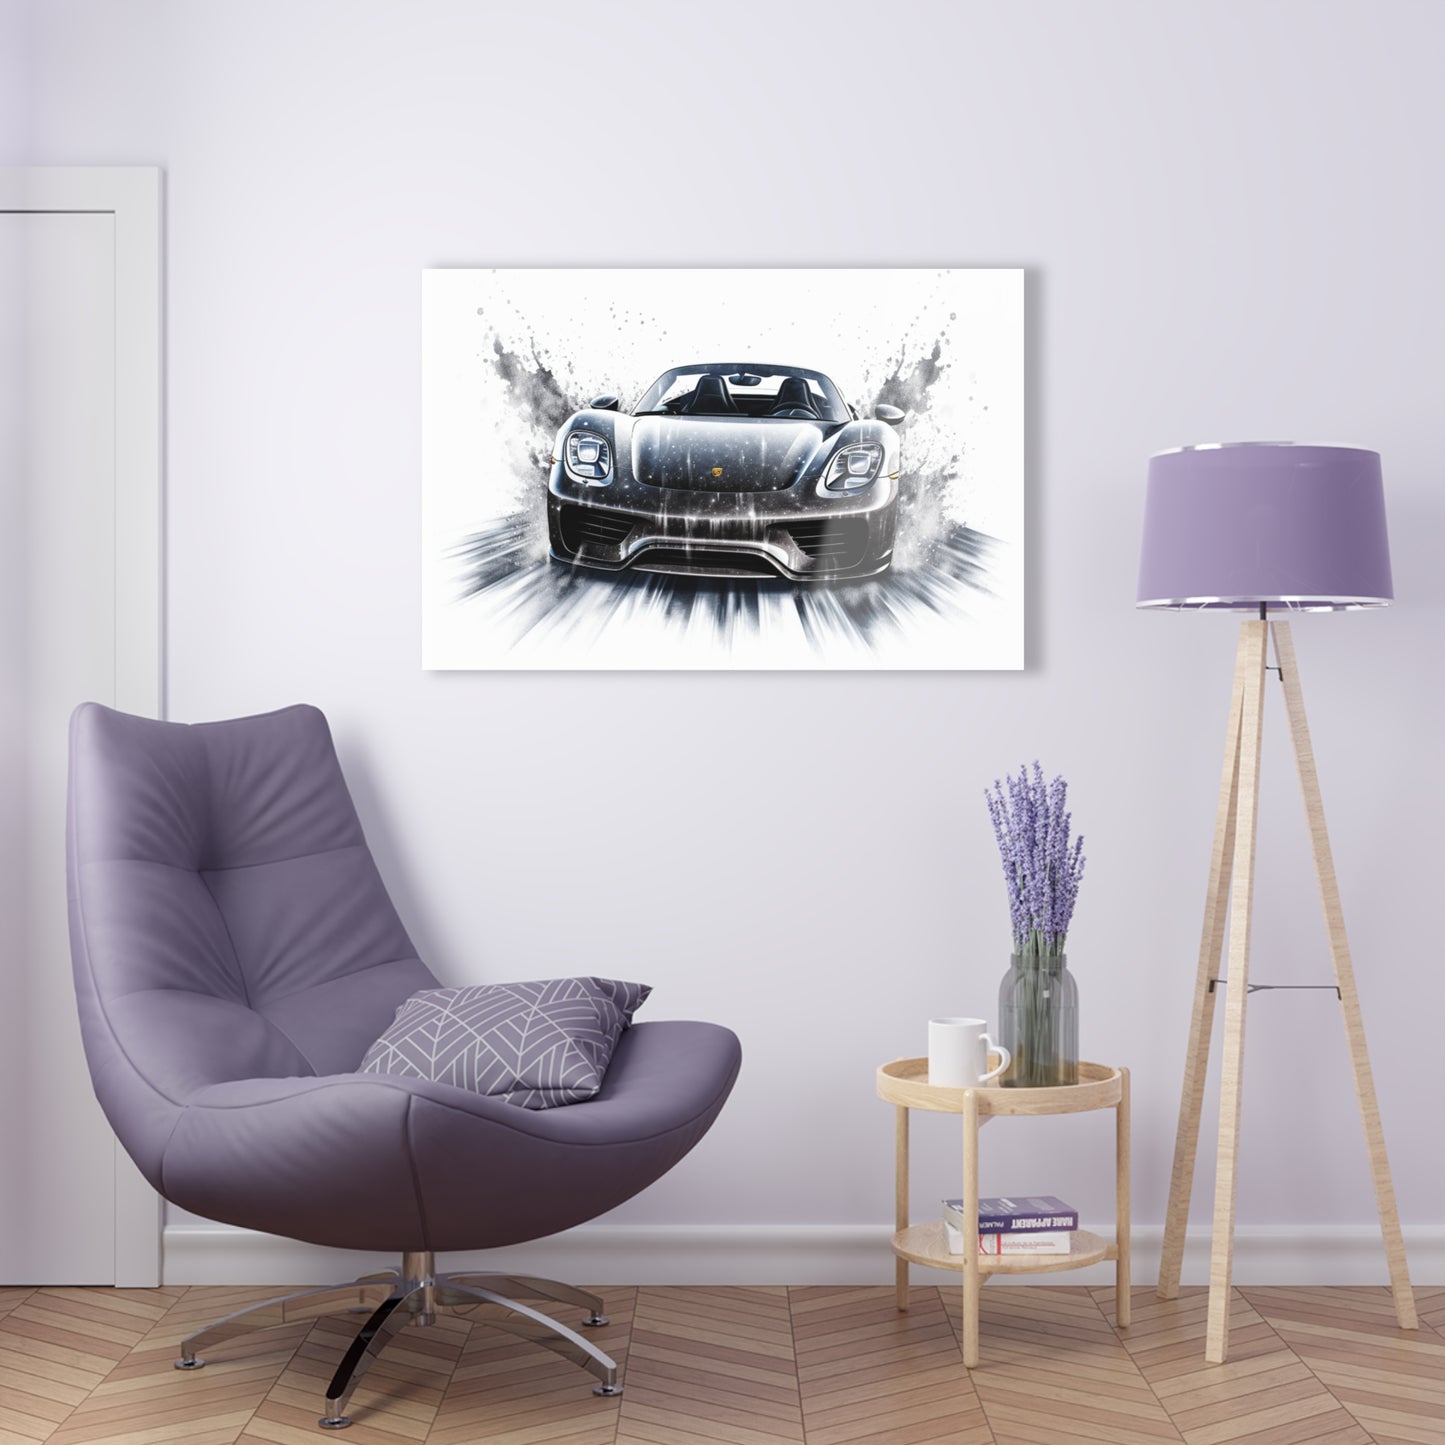 Acrylic Prints 918 Spyder white background driving fast with water splashing 3